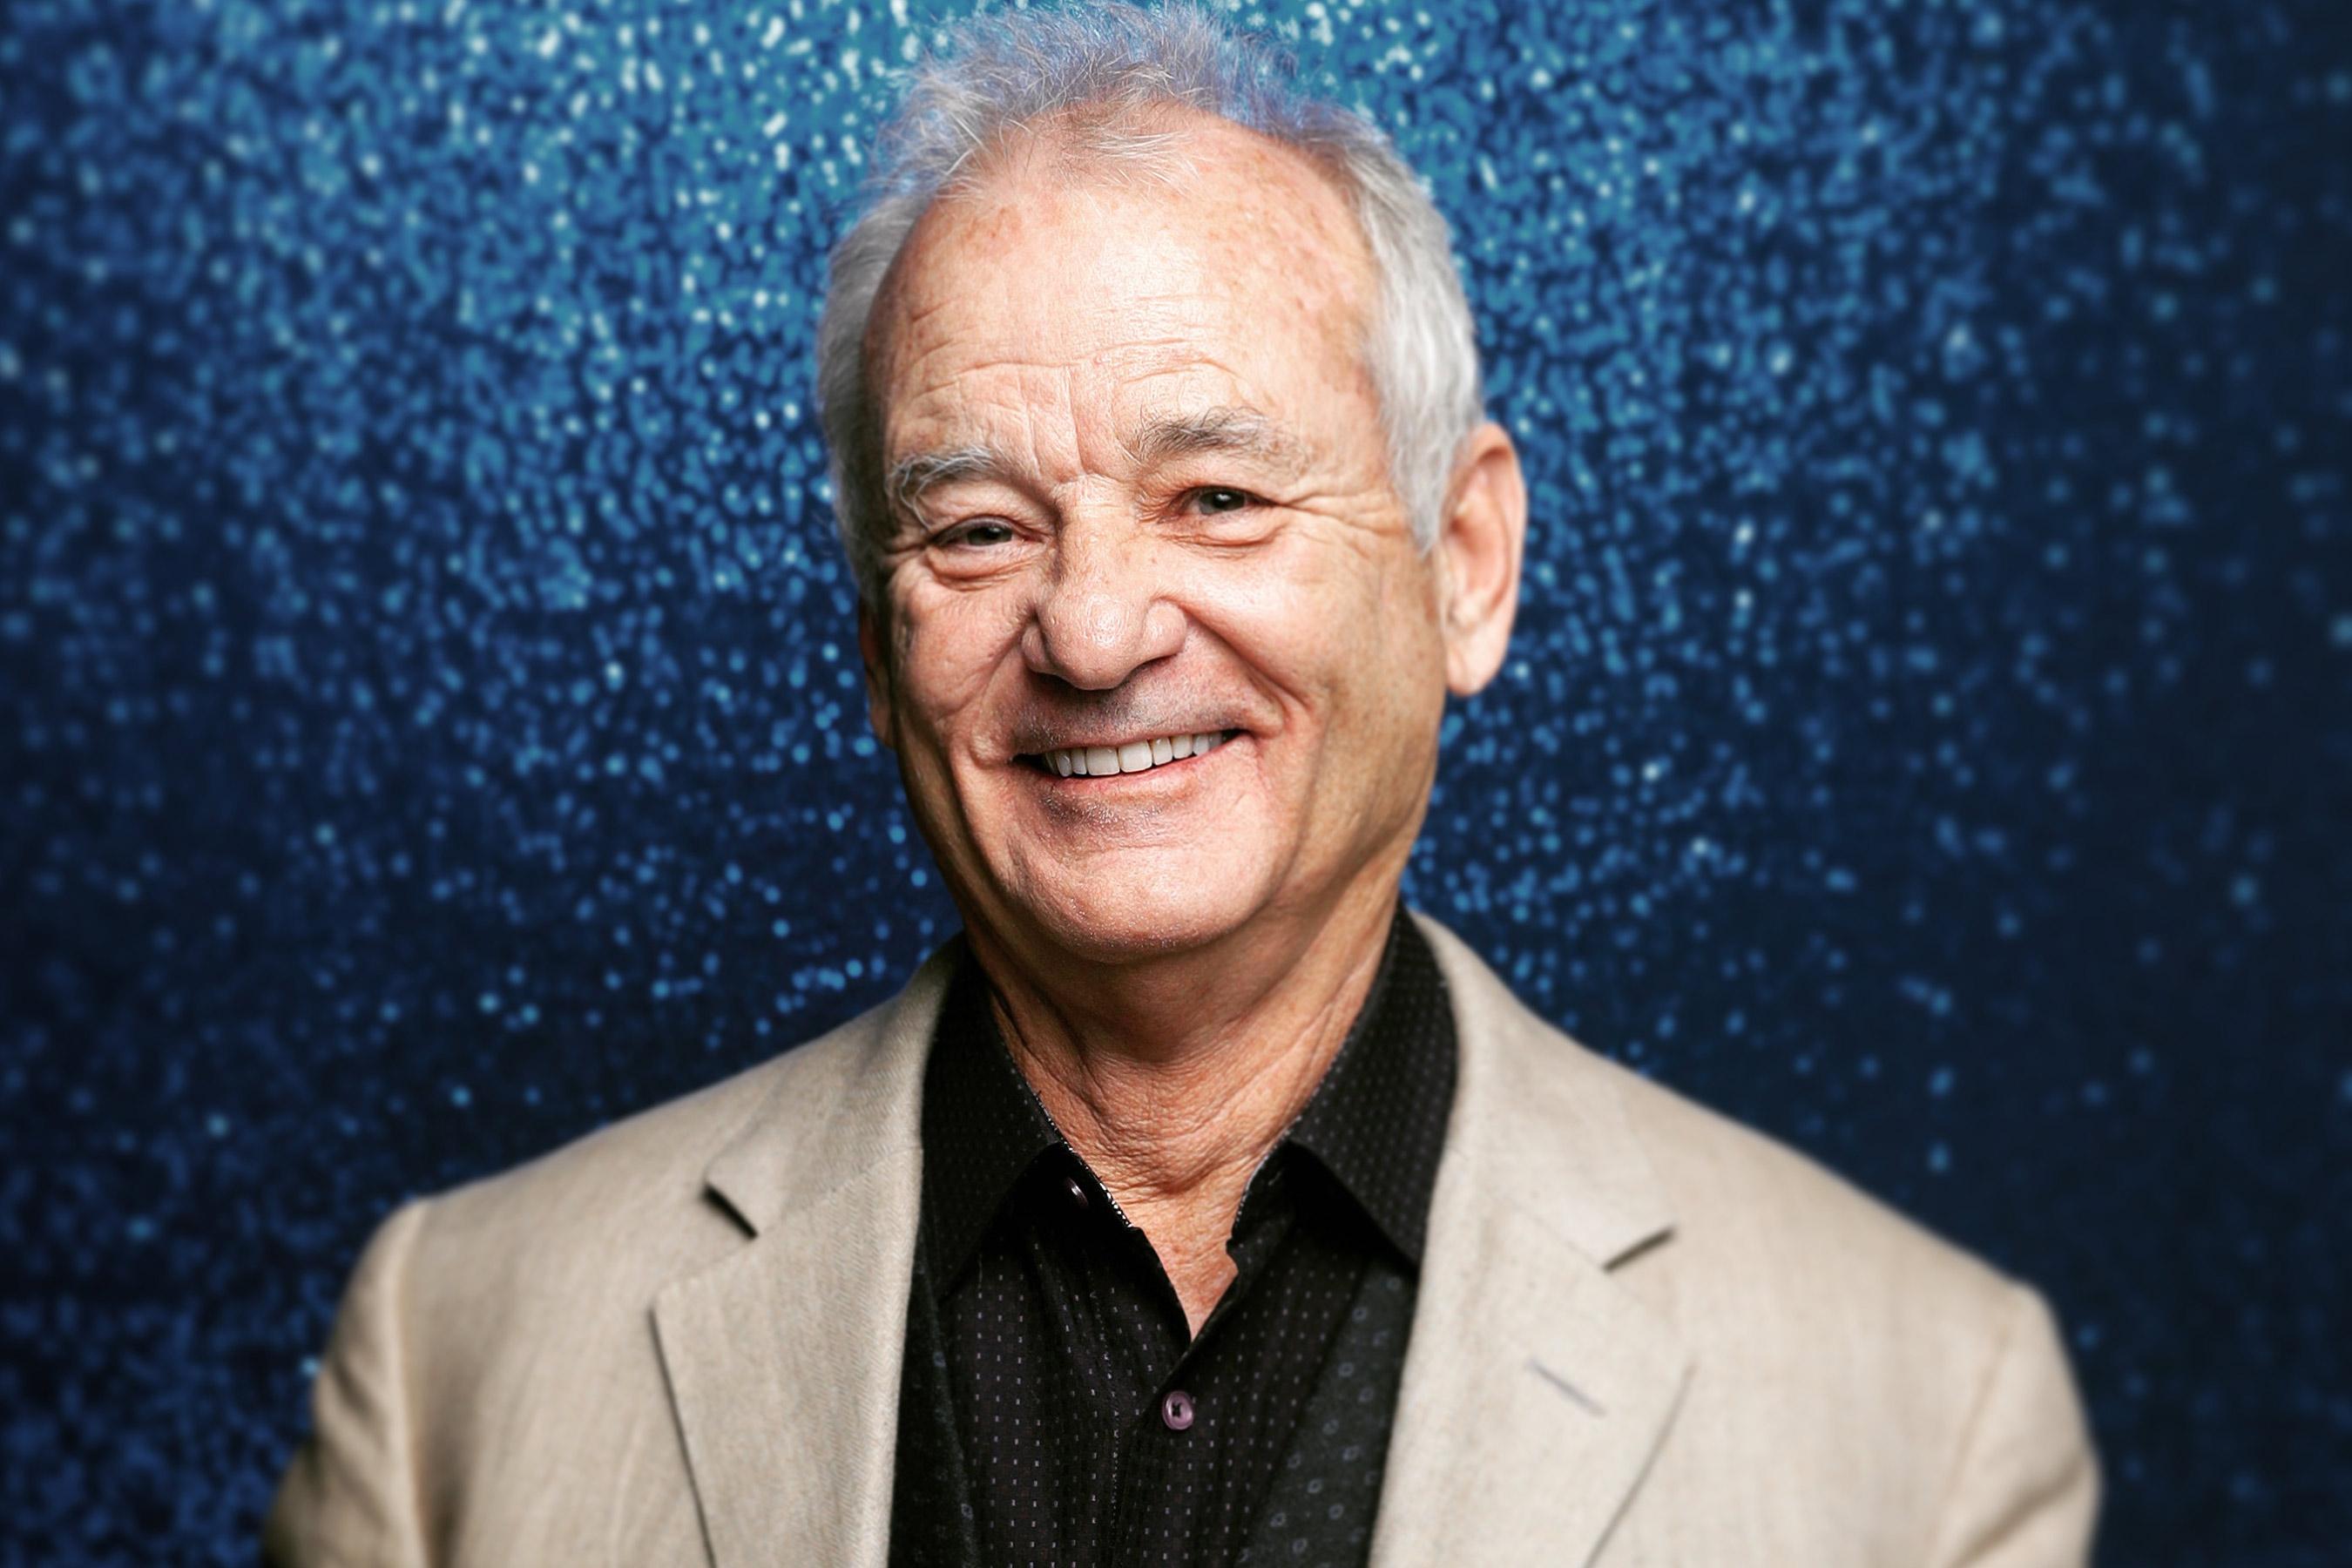 Bill Murray Reveals He's Reachable Outside His 800 Number